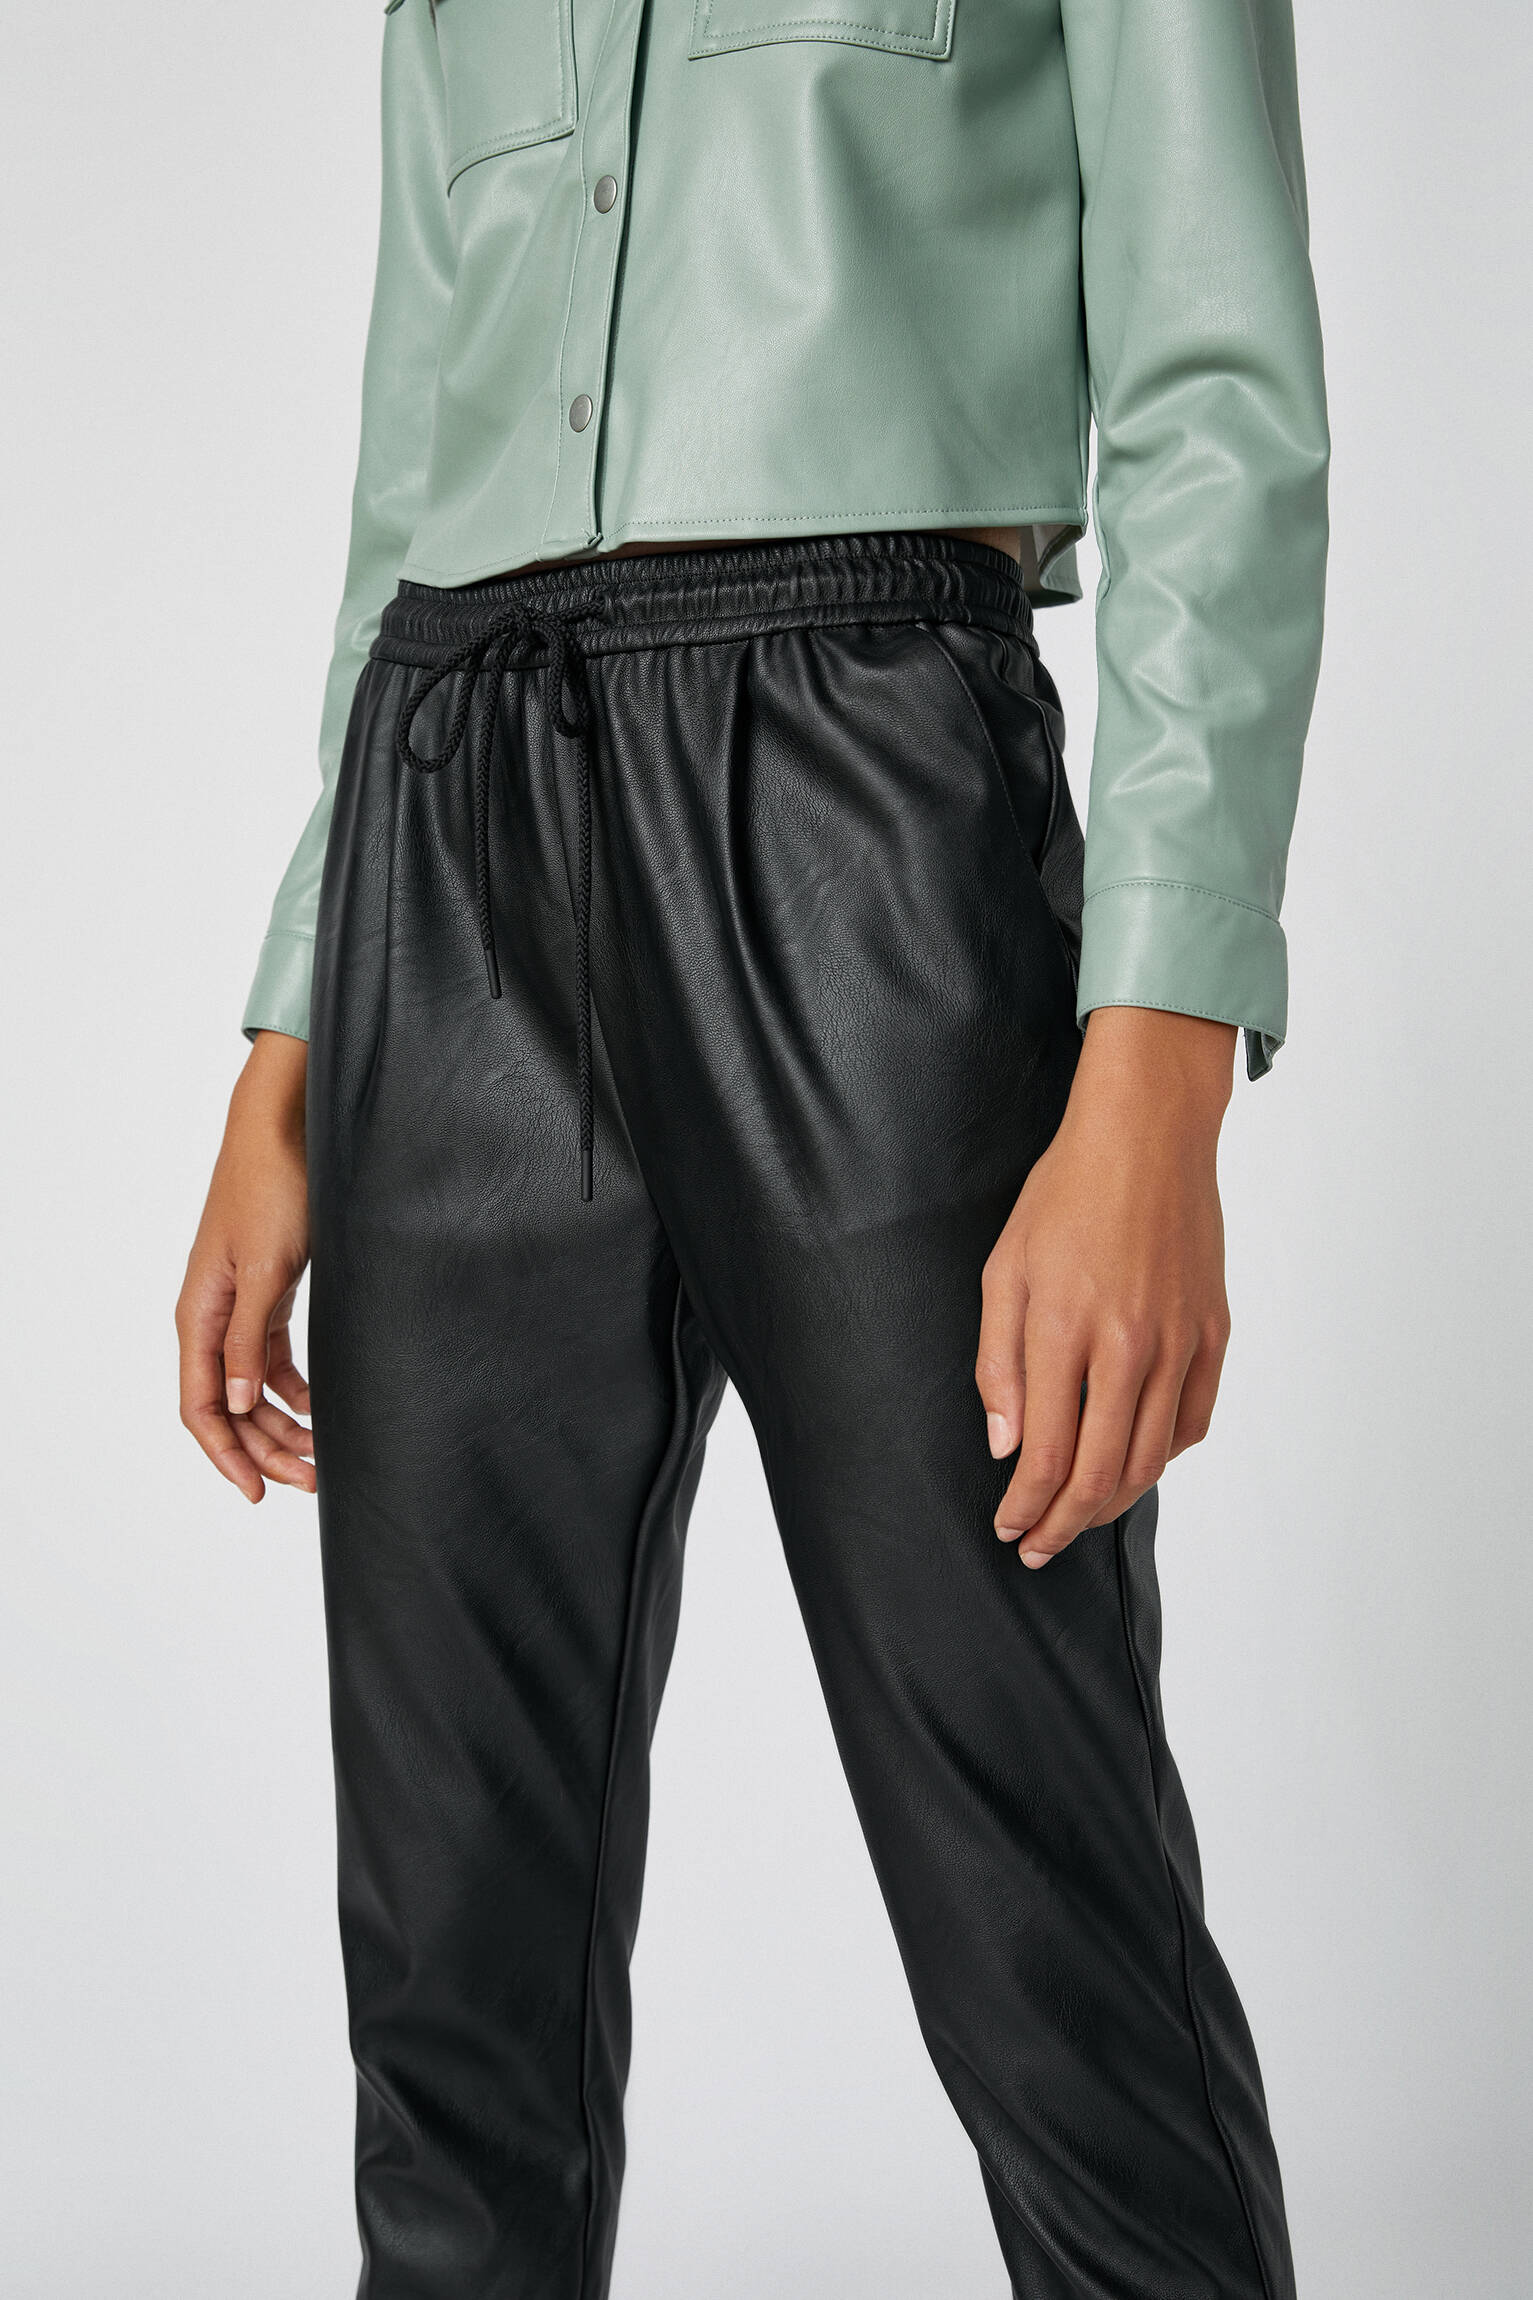 Modalite.net - Pull & Bear - Faux leather stretch jogging trousers